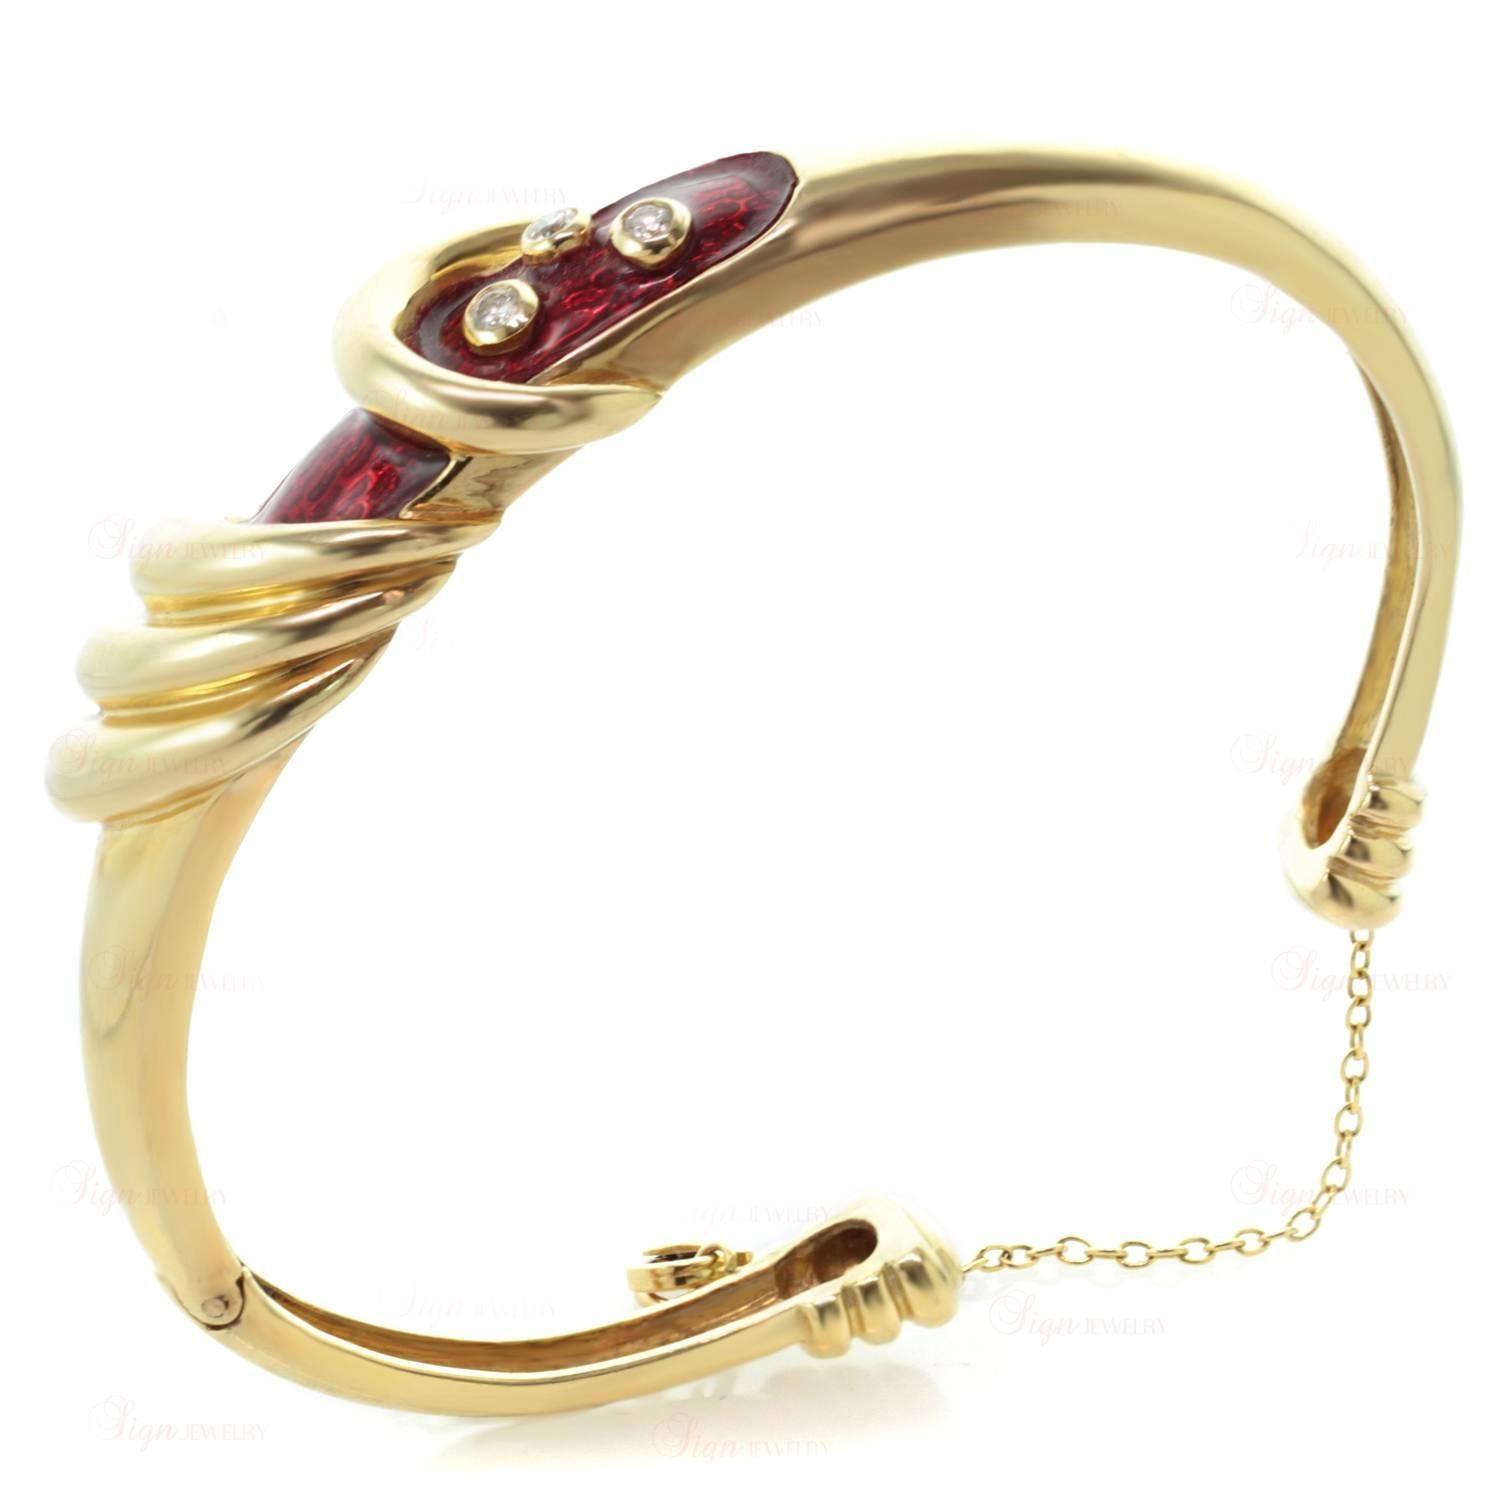 A classic deco inspired bangle made in the 1970s. This bracelet is crafted out of 14k yellow gold and features 3 sparkling diamonds bezel set in red enamel. Measurements: 6.5